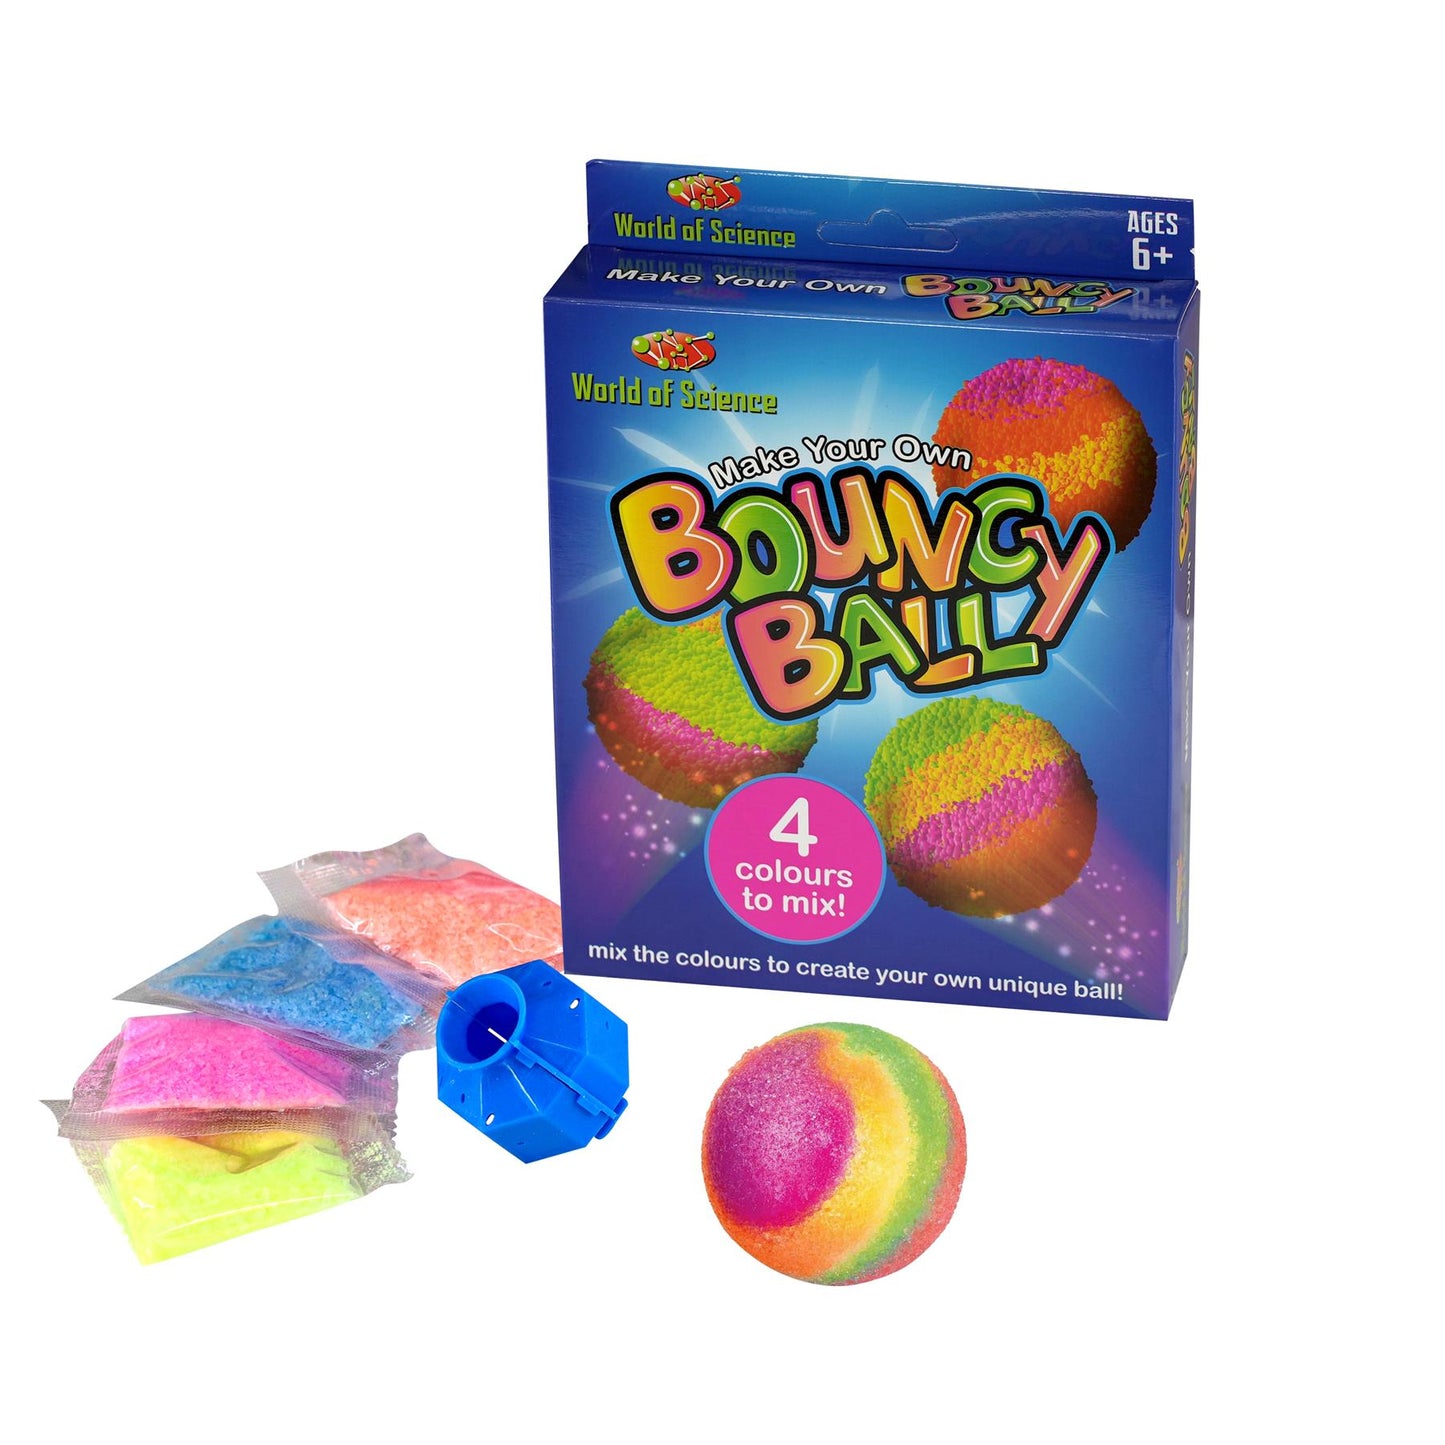 Make Your Own Bouncy Ball Kids Art Craft Set by The Magic Toy Shop - UKBuyZone